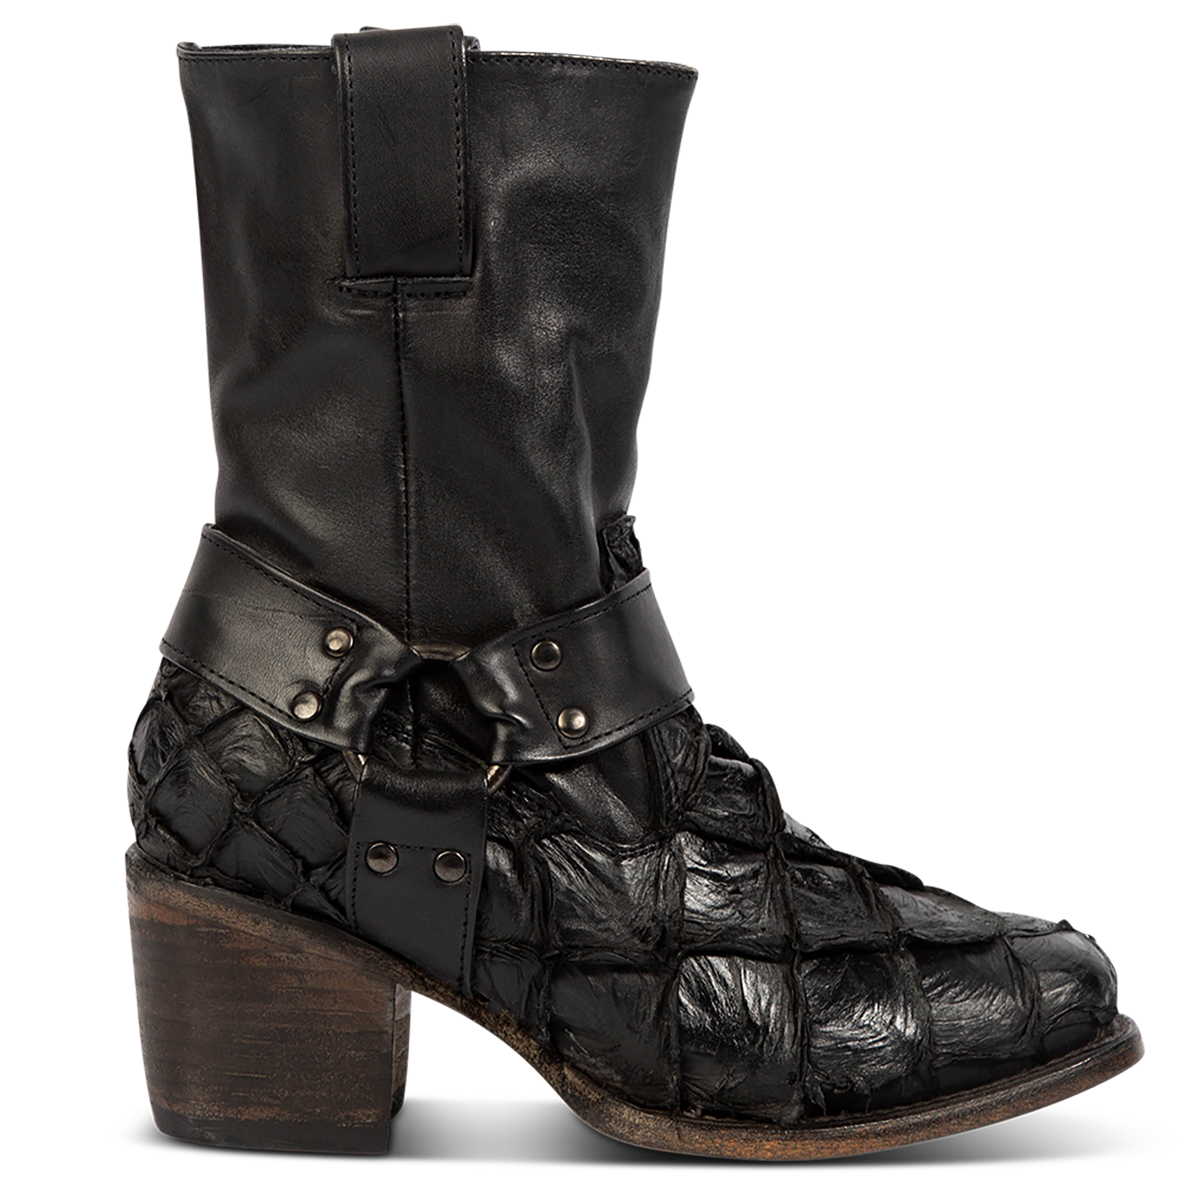 FREEBIRD women's Darcy black fish leather boot with a studded ankle harness, leather pull straps, an inside zip closure and a square toe